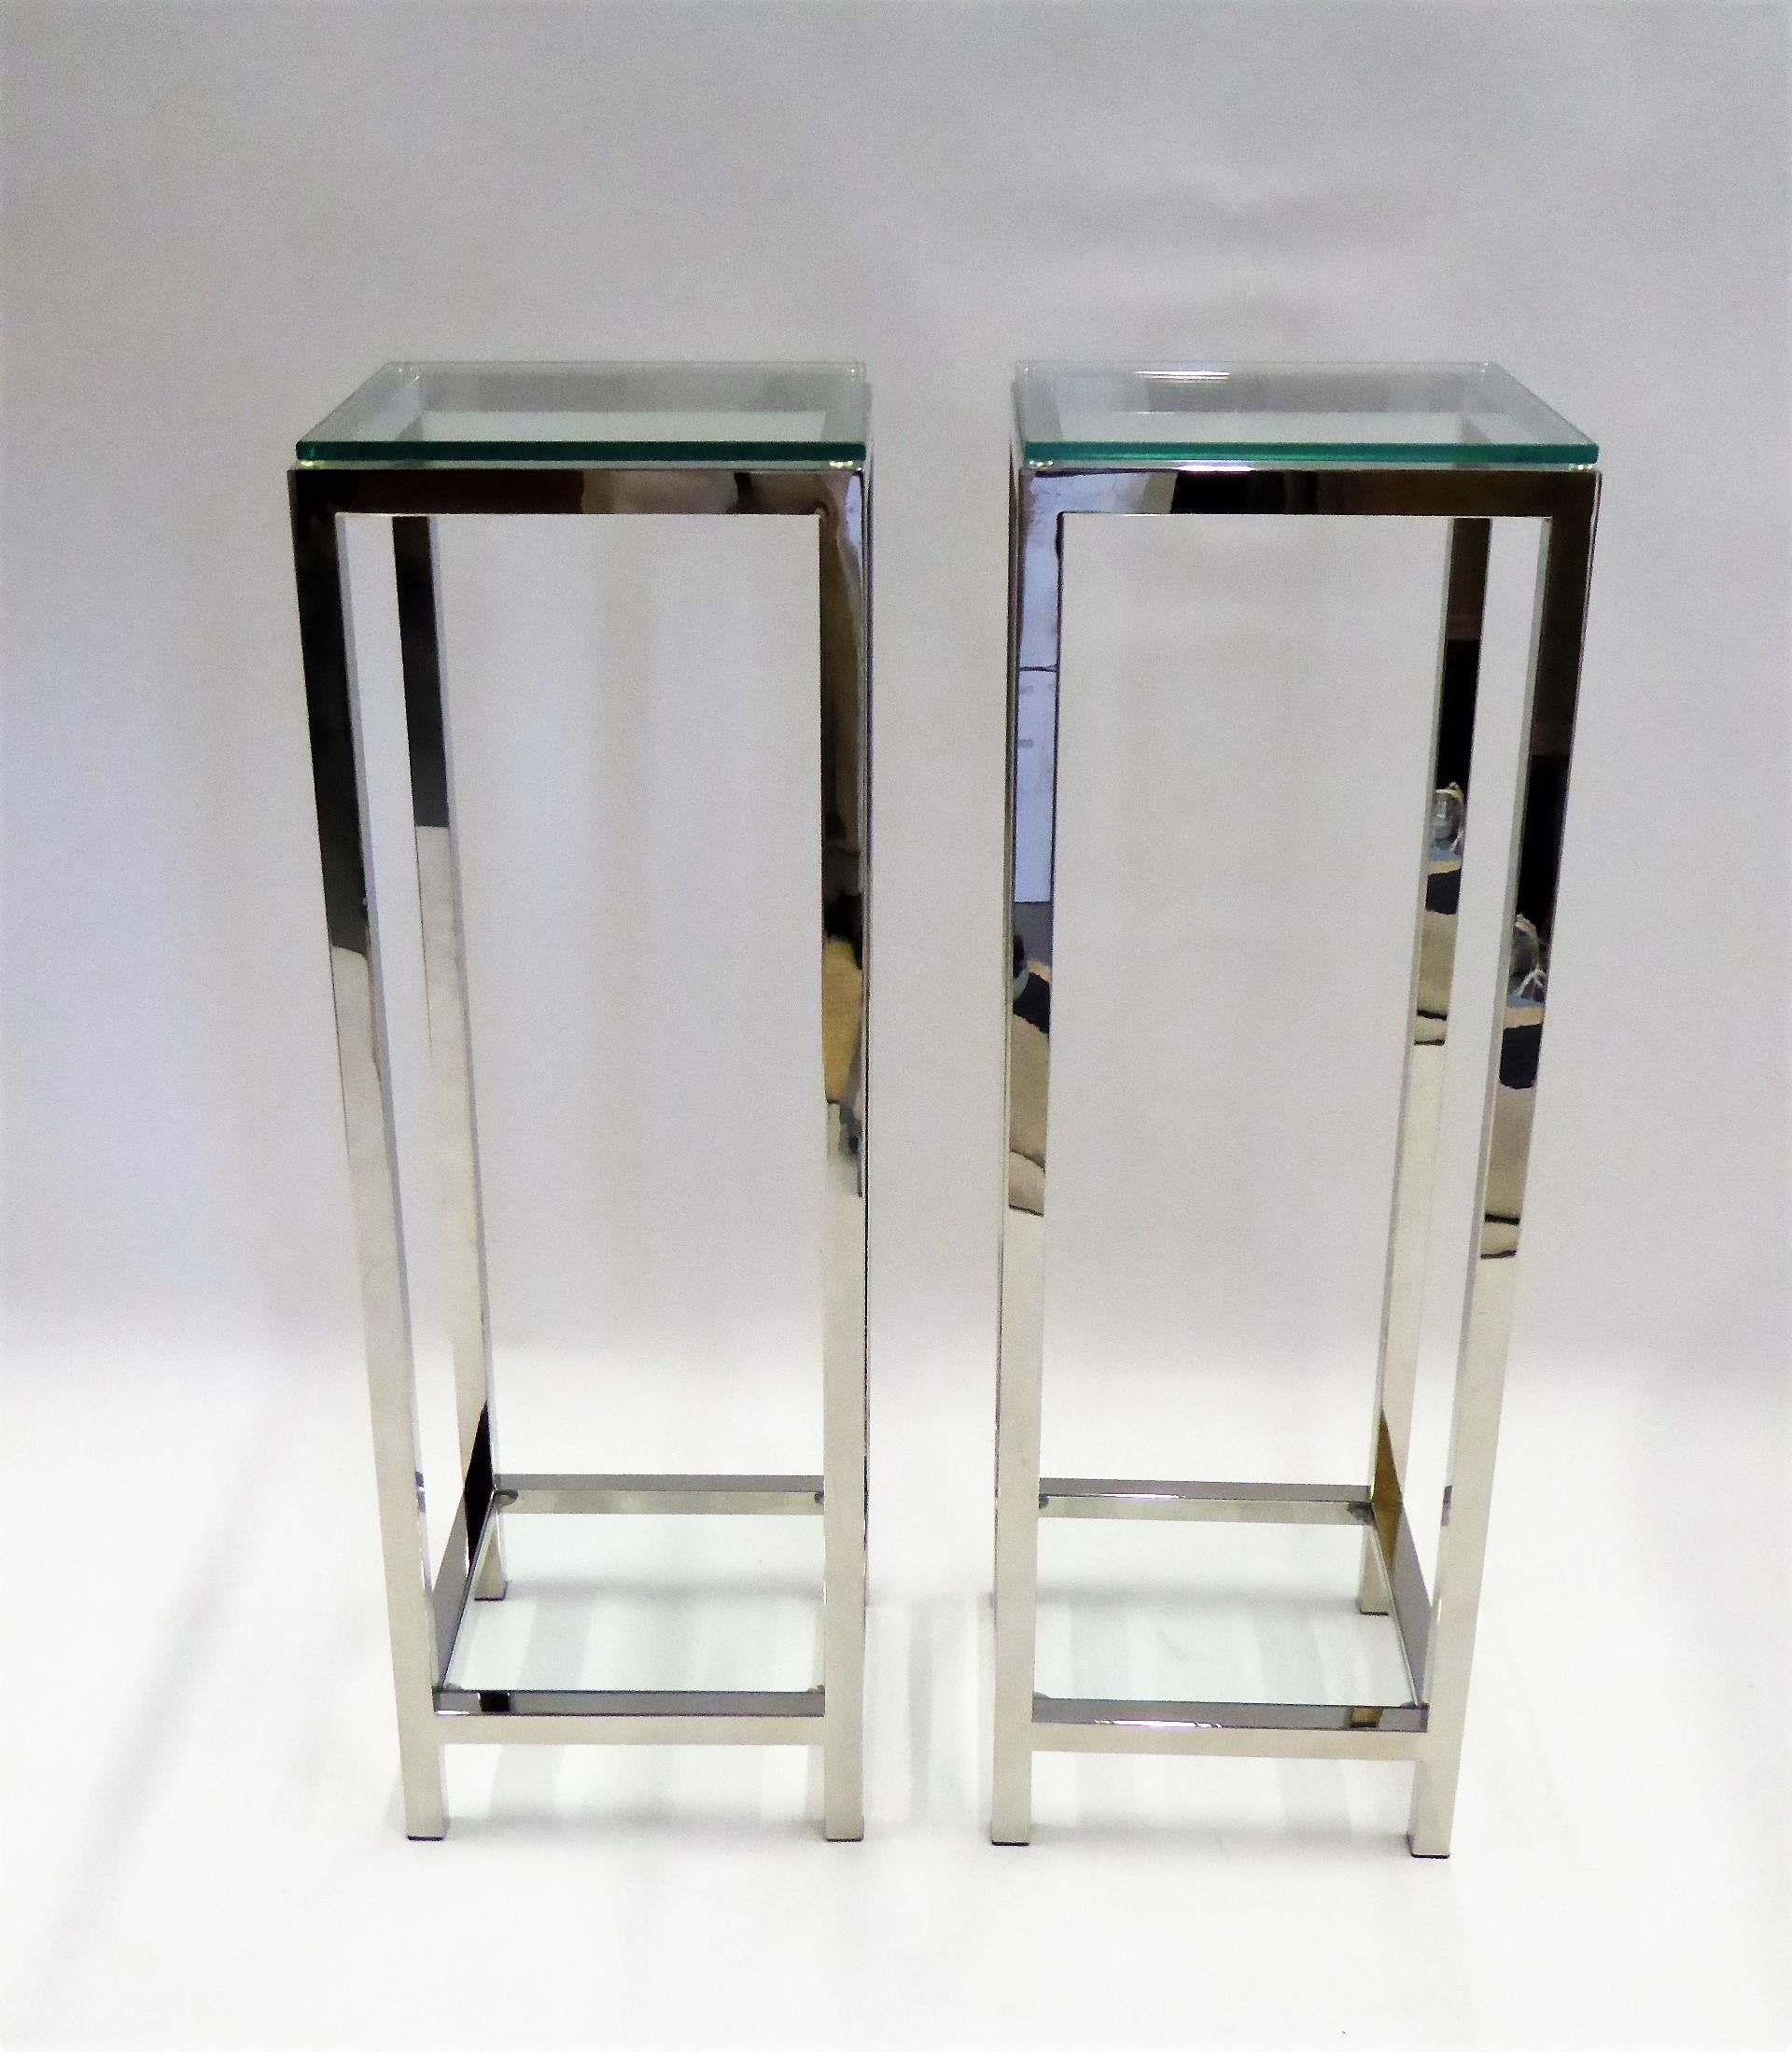 With fine bones, this pair of chrome and glass pedestals or stands are extremely well made in the style of Brueton and are in excellent condition. Each with a 3/8 inch top glass and an inset bottom stretcher glass. Lustrous chrome.
Measurements: 12